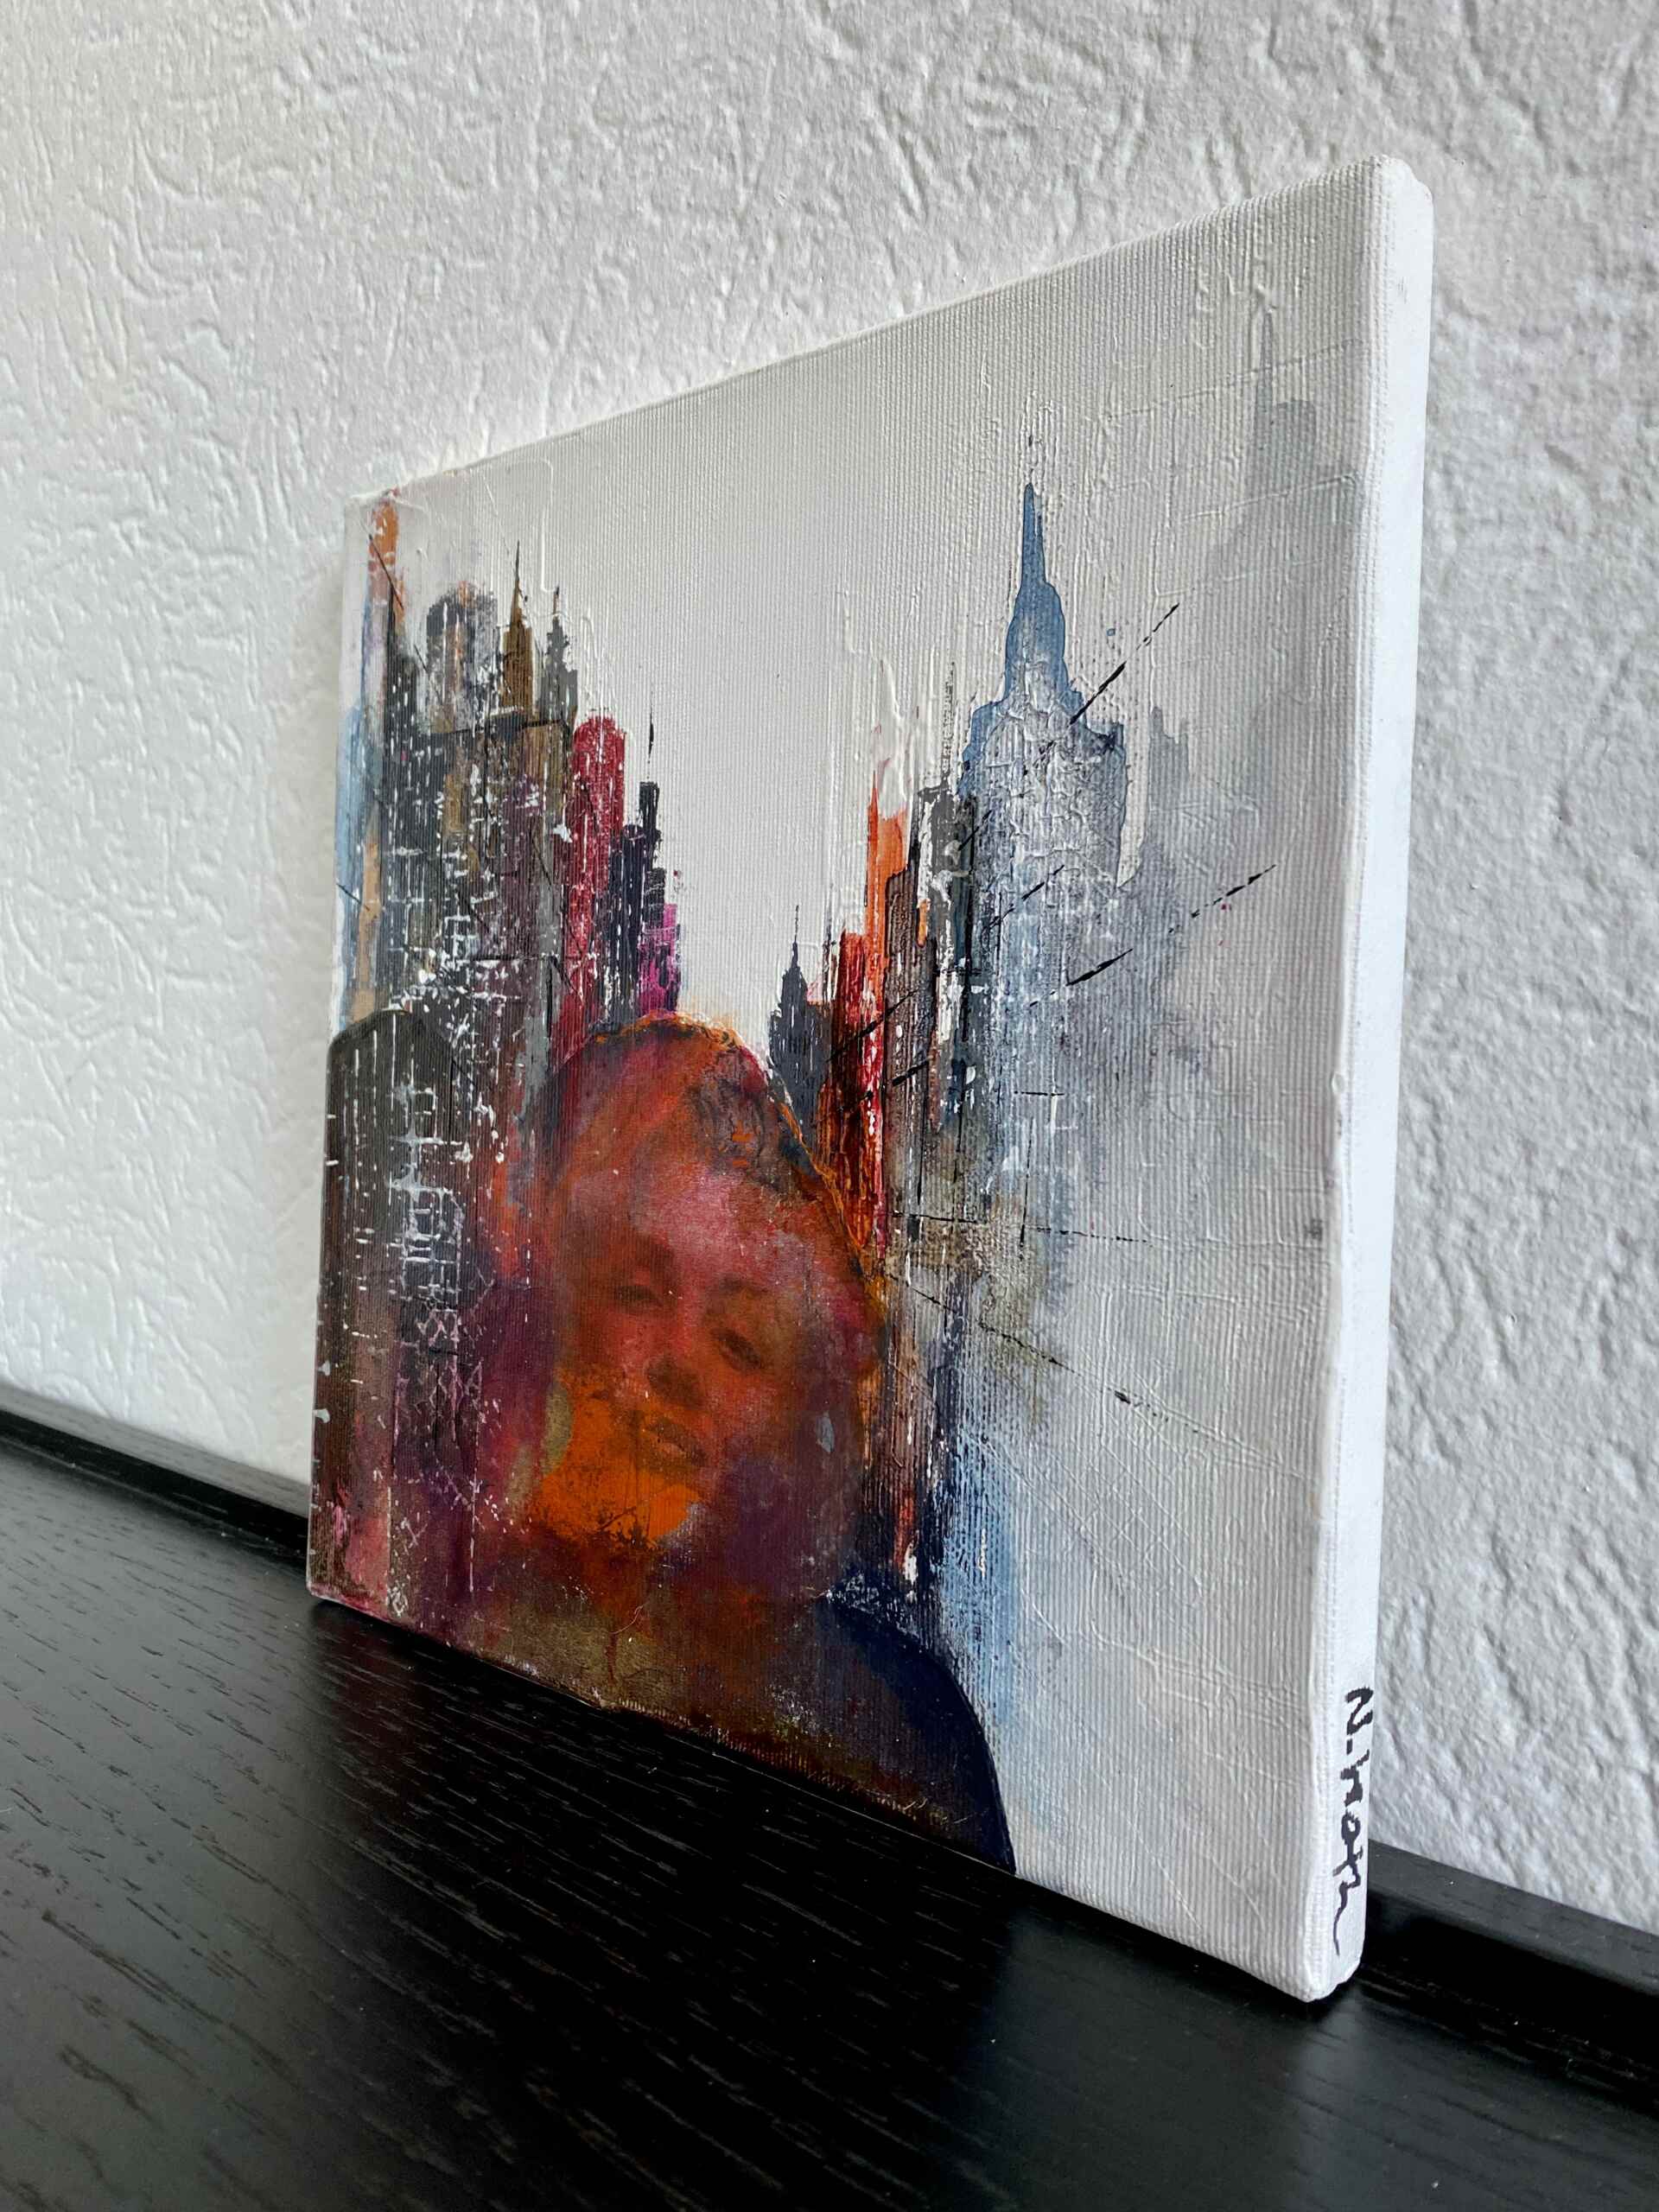 Side view of artwork "Sightseeing with Marilyn" by Nina Groth